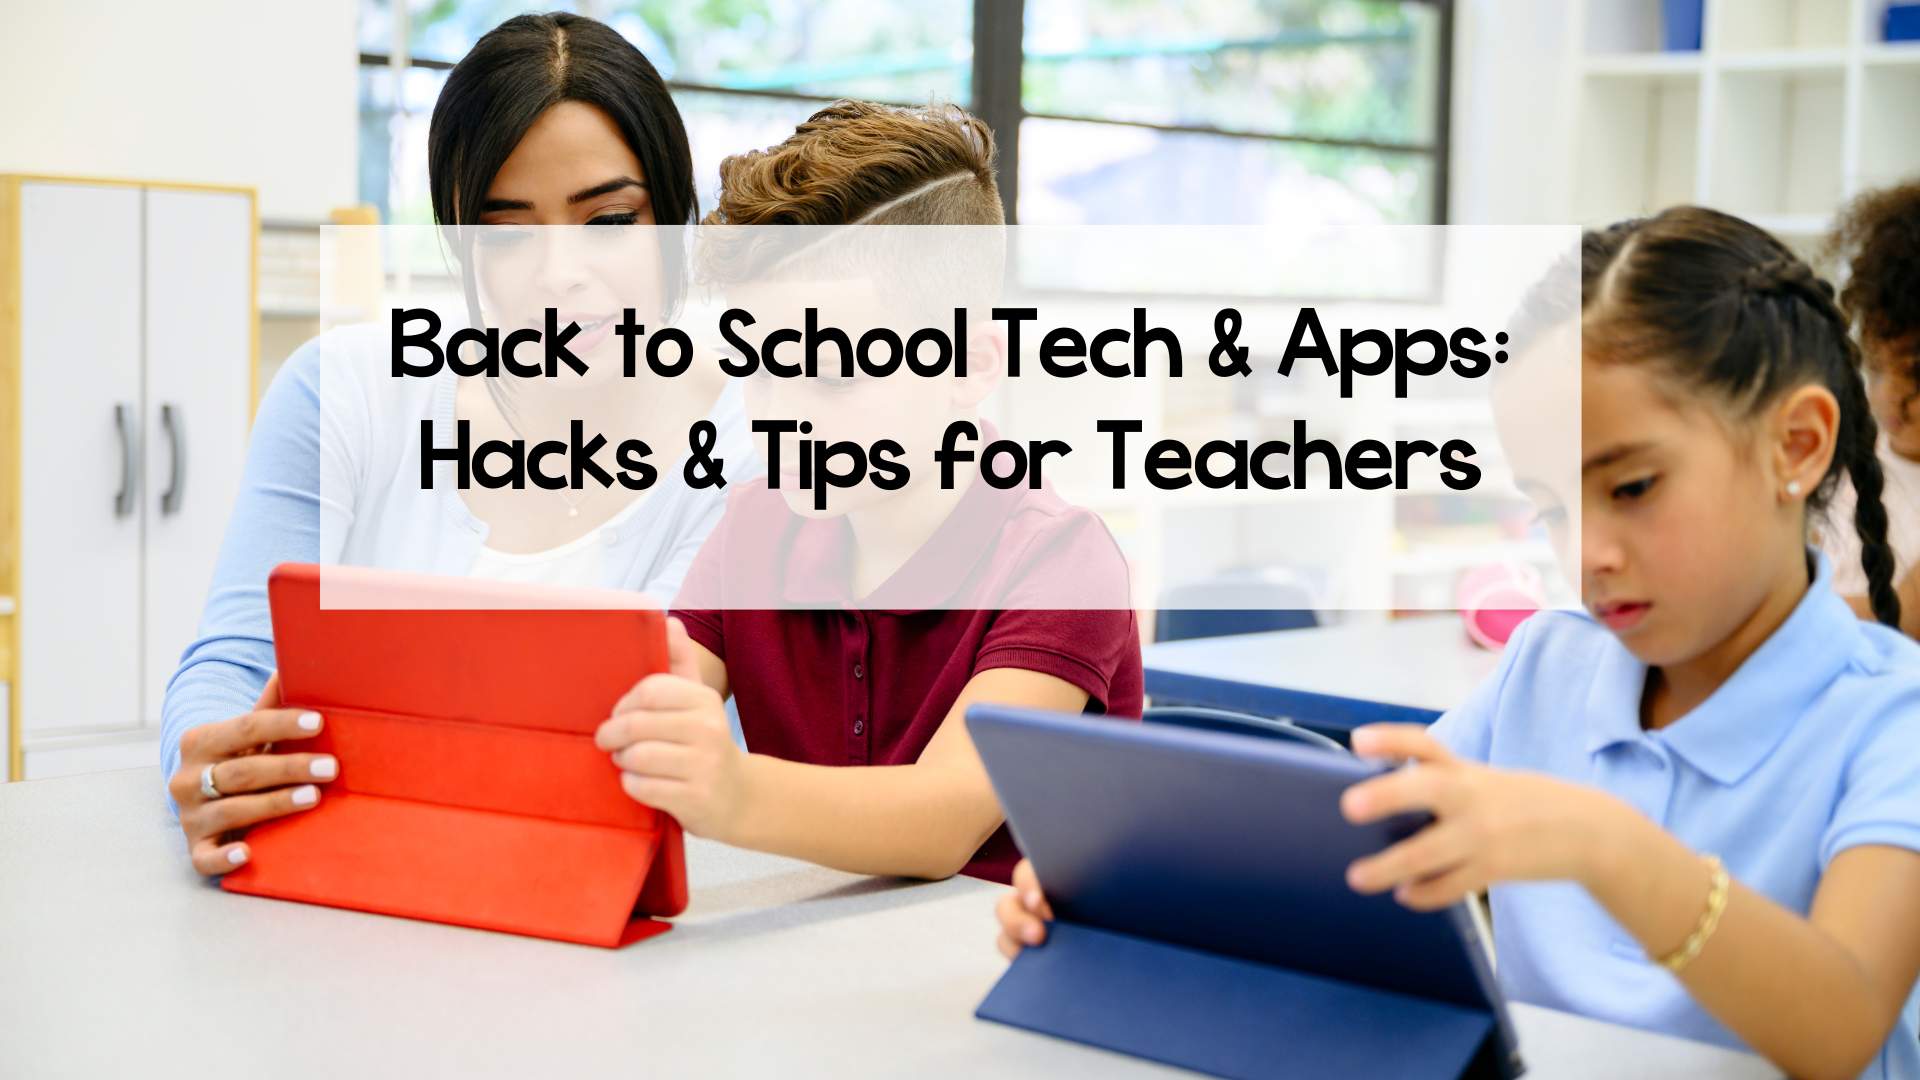 Back to School Tech & Apps: Hacks and Tips for Teachers